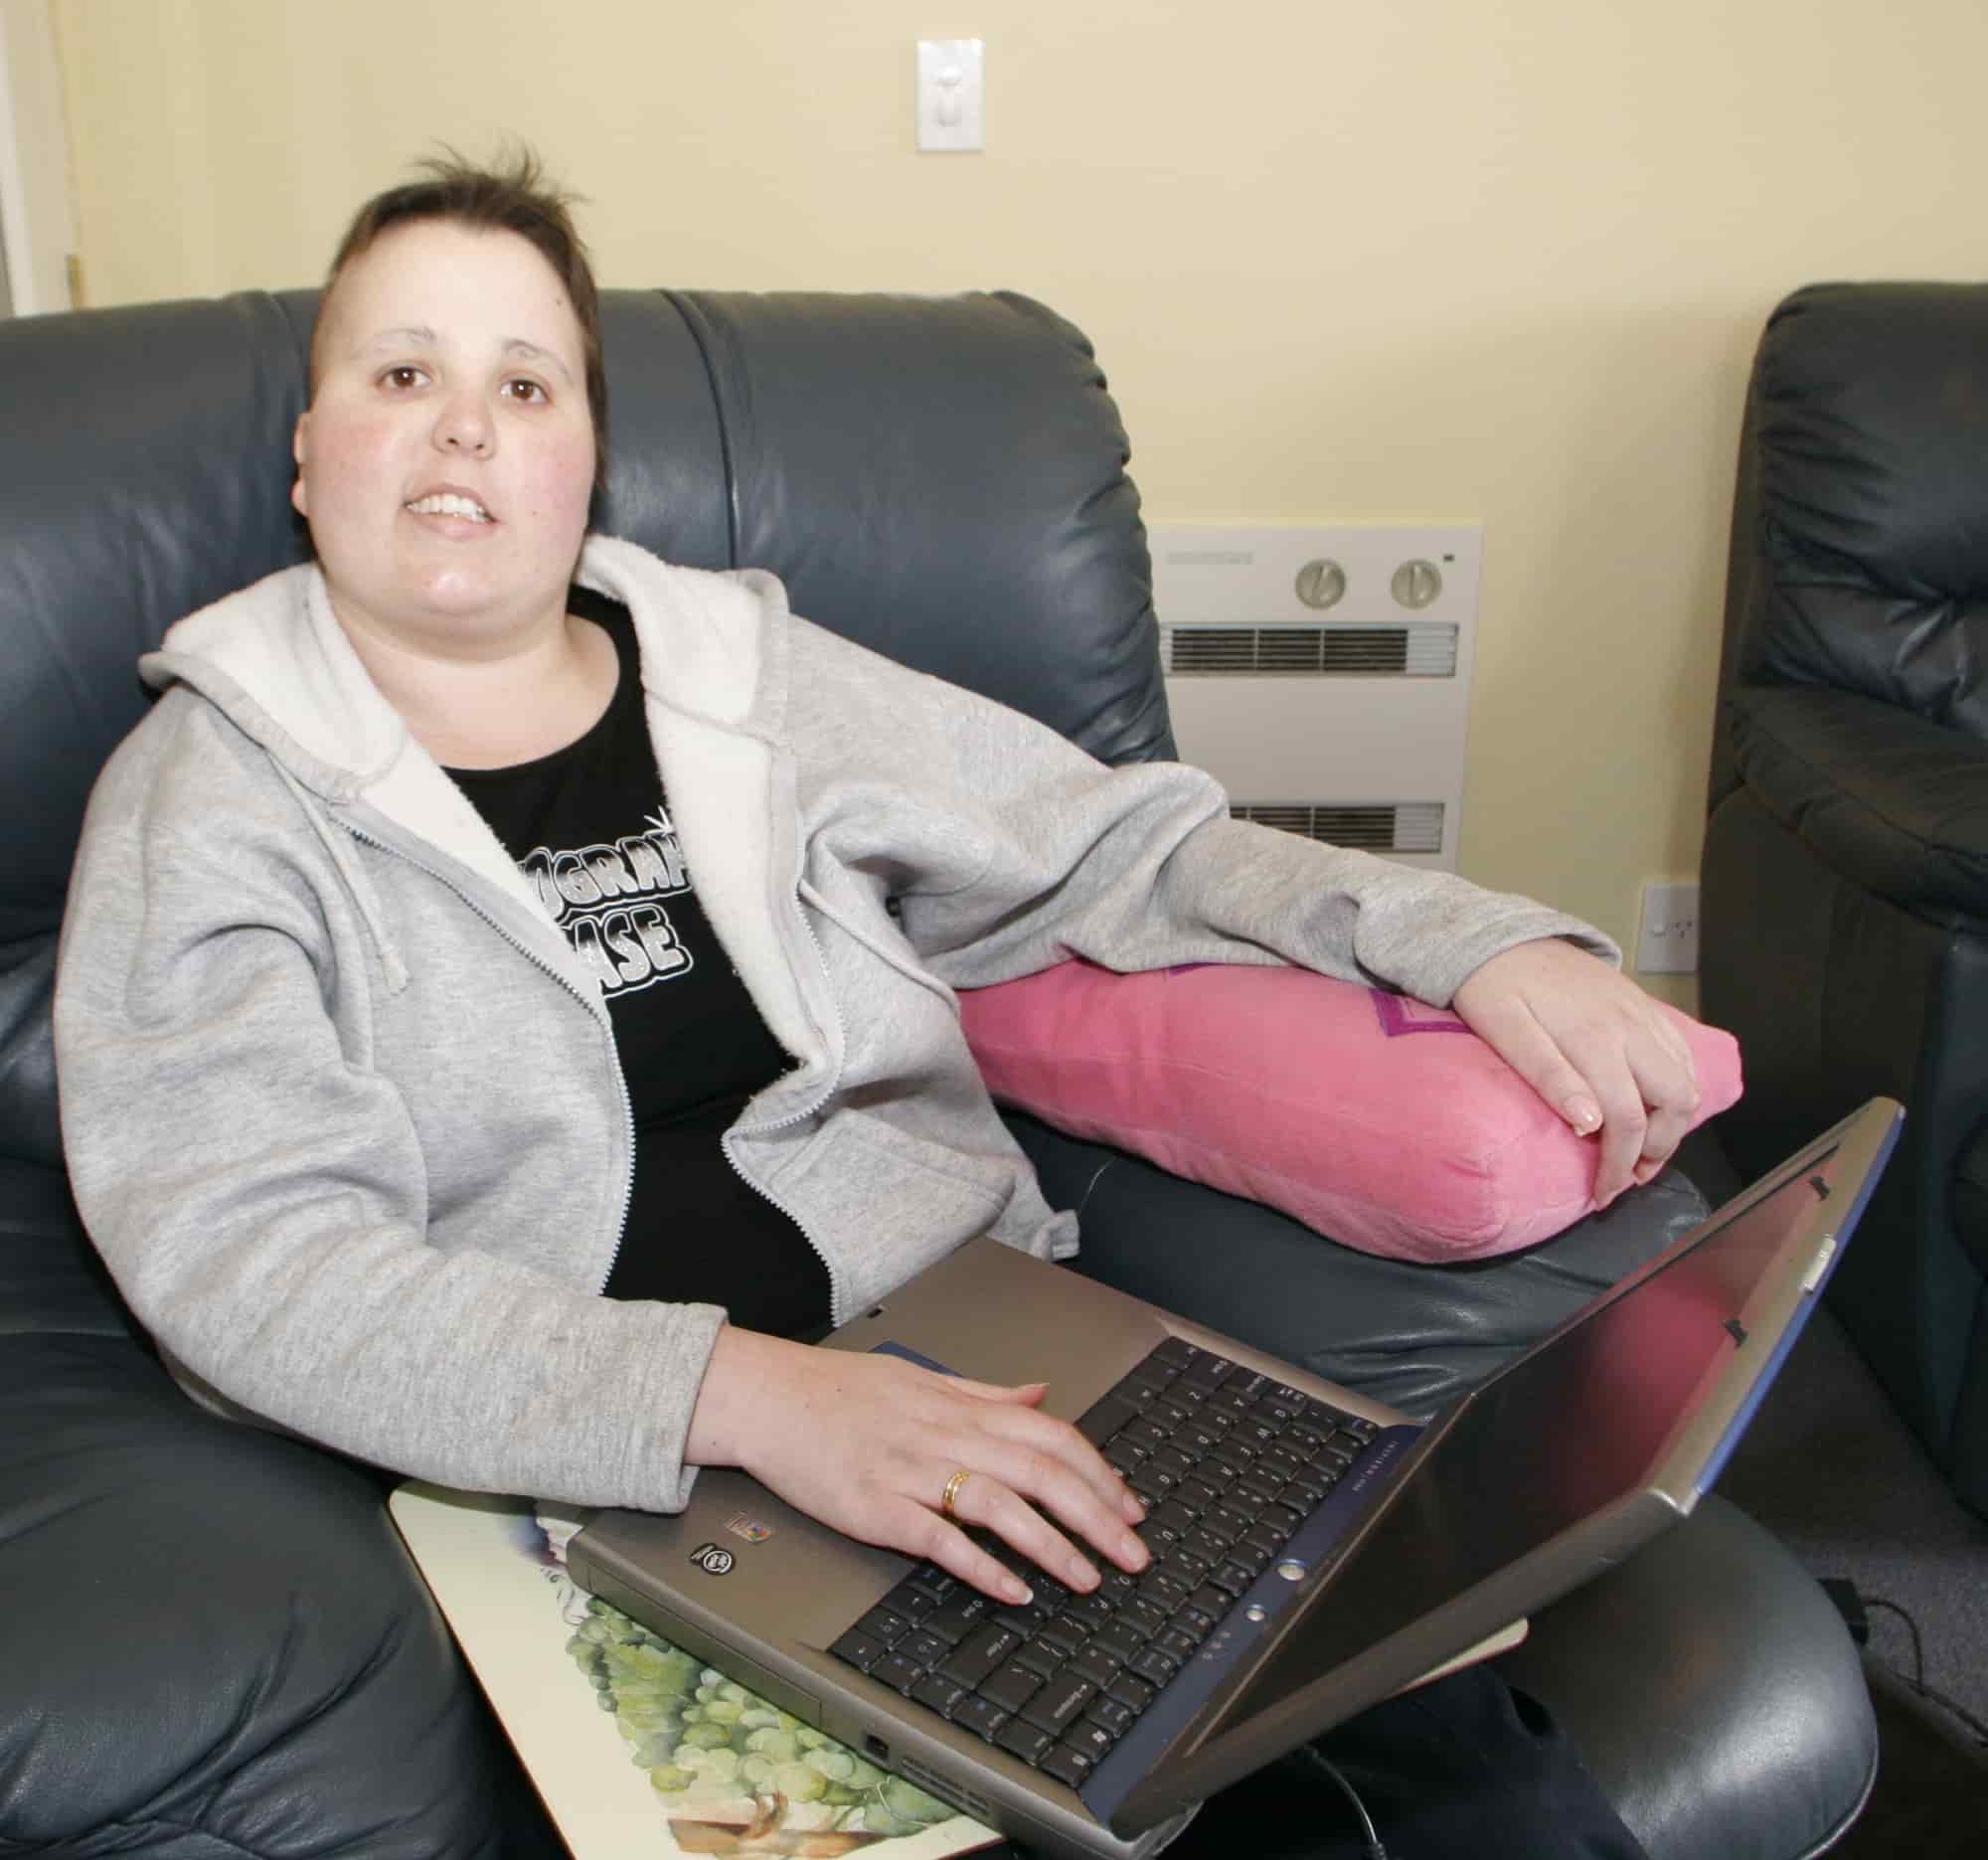 trudi sitting on a couch and using a laptop